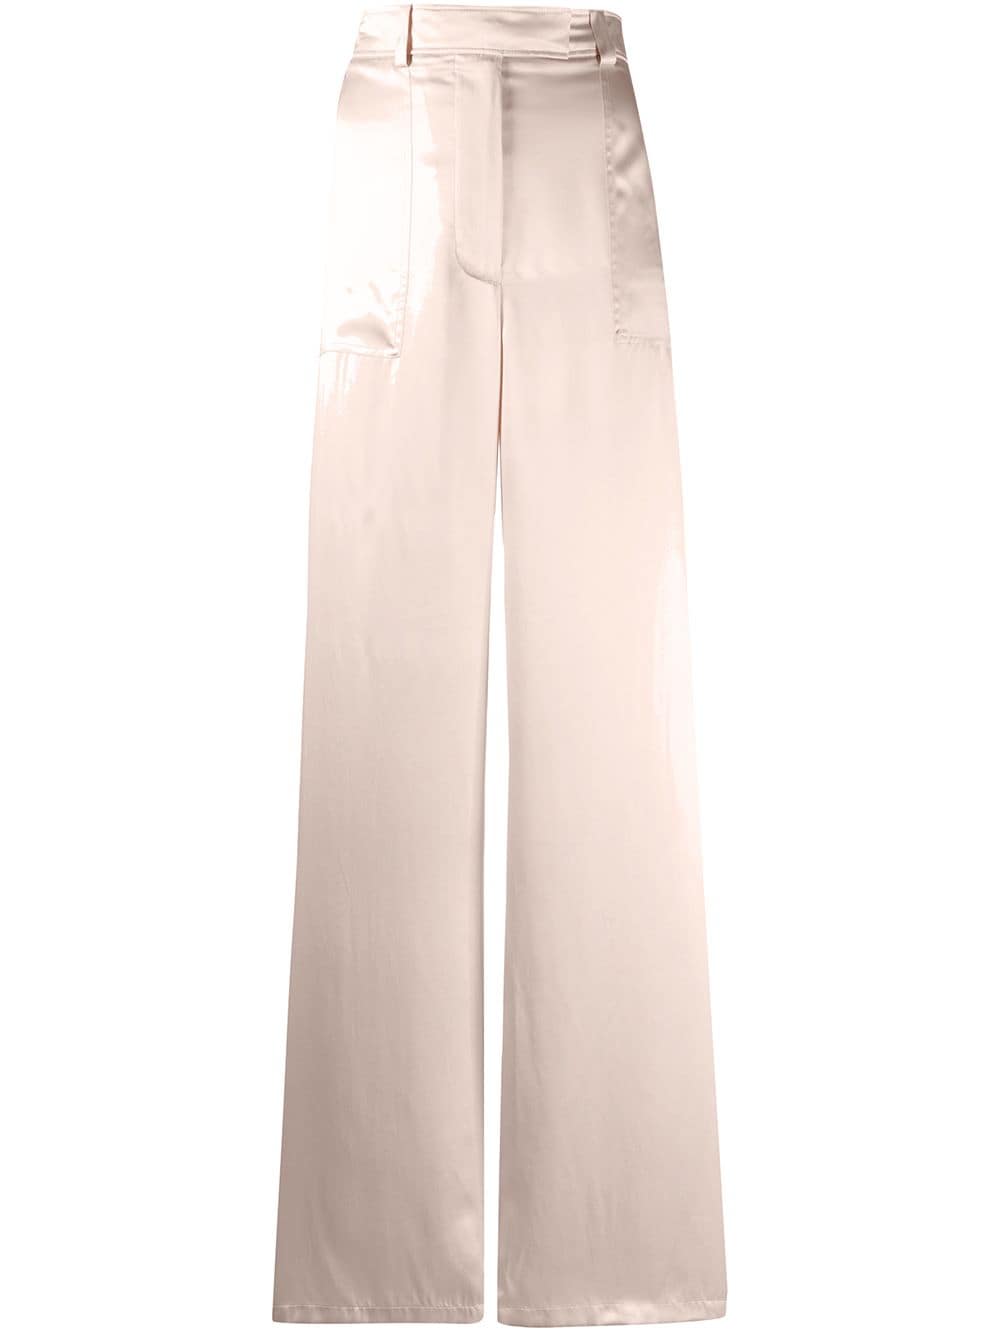 TOM FORD HIGH-RISE WIDE-LEG SATIN TROUSERS